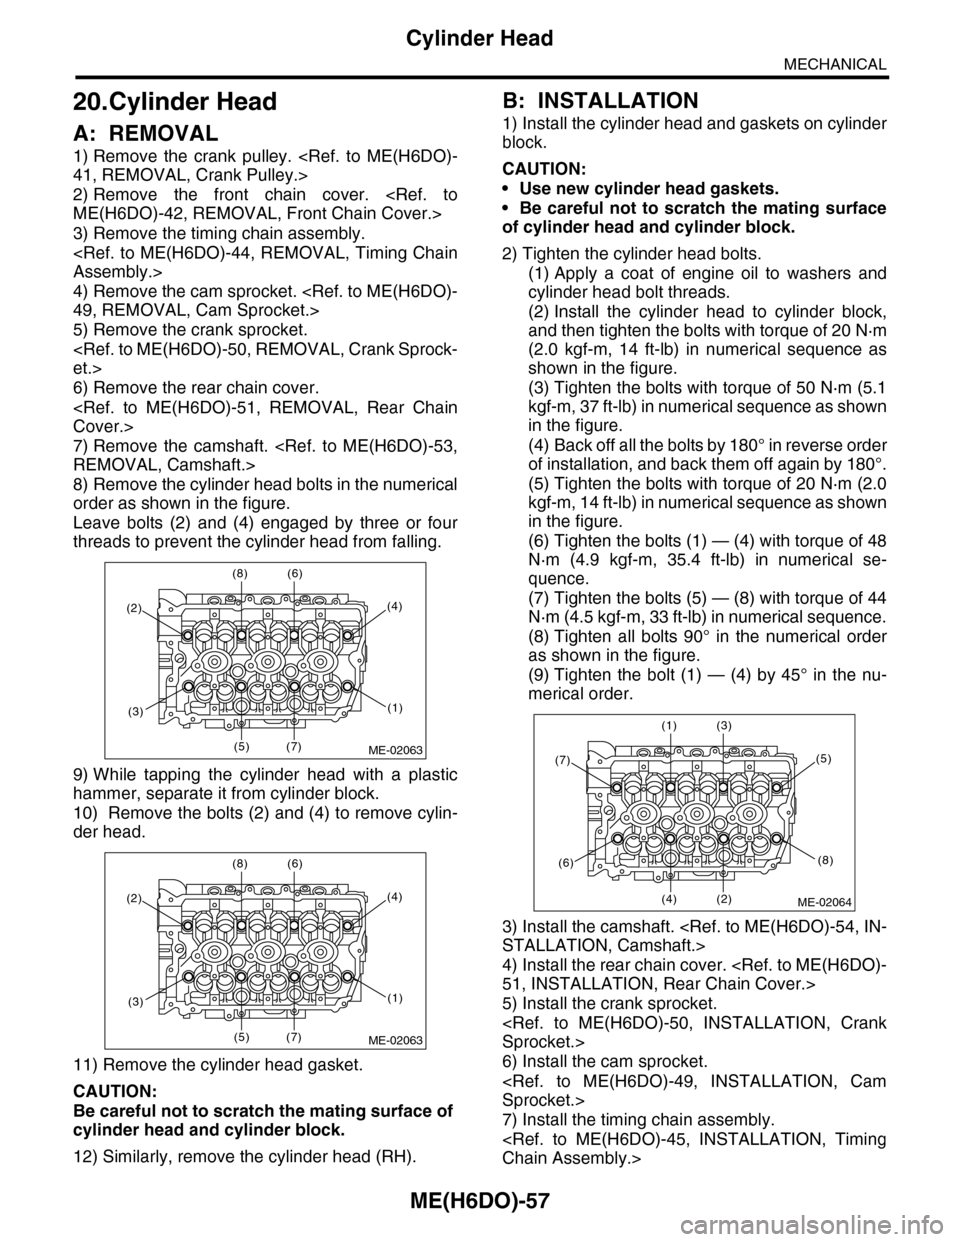 SUBARU TRIBECA 2009 1.G Service Workshop Manual ME(H6DO)-57
Cylinder Head
MECHANICAL
20.Cylinder Head
A: REMOVAL
1) Remove  the  crank  pulley.  <Ref.  to  ME(H6DO)-
41, REMOVAL, Crank Pulley.>
2) Remove  the  front  chain  cover.  <Ref.  to
ME(H6D